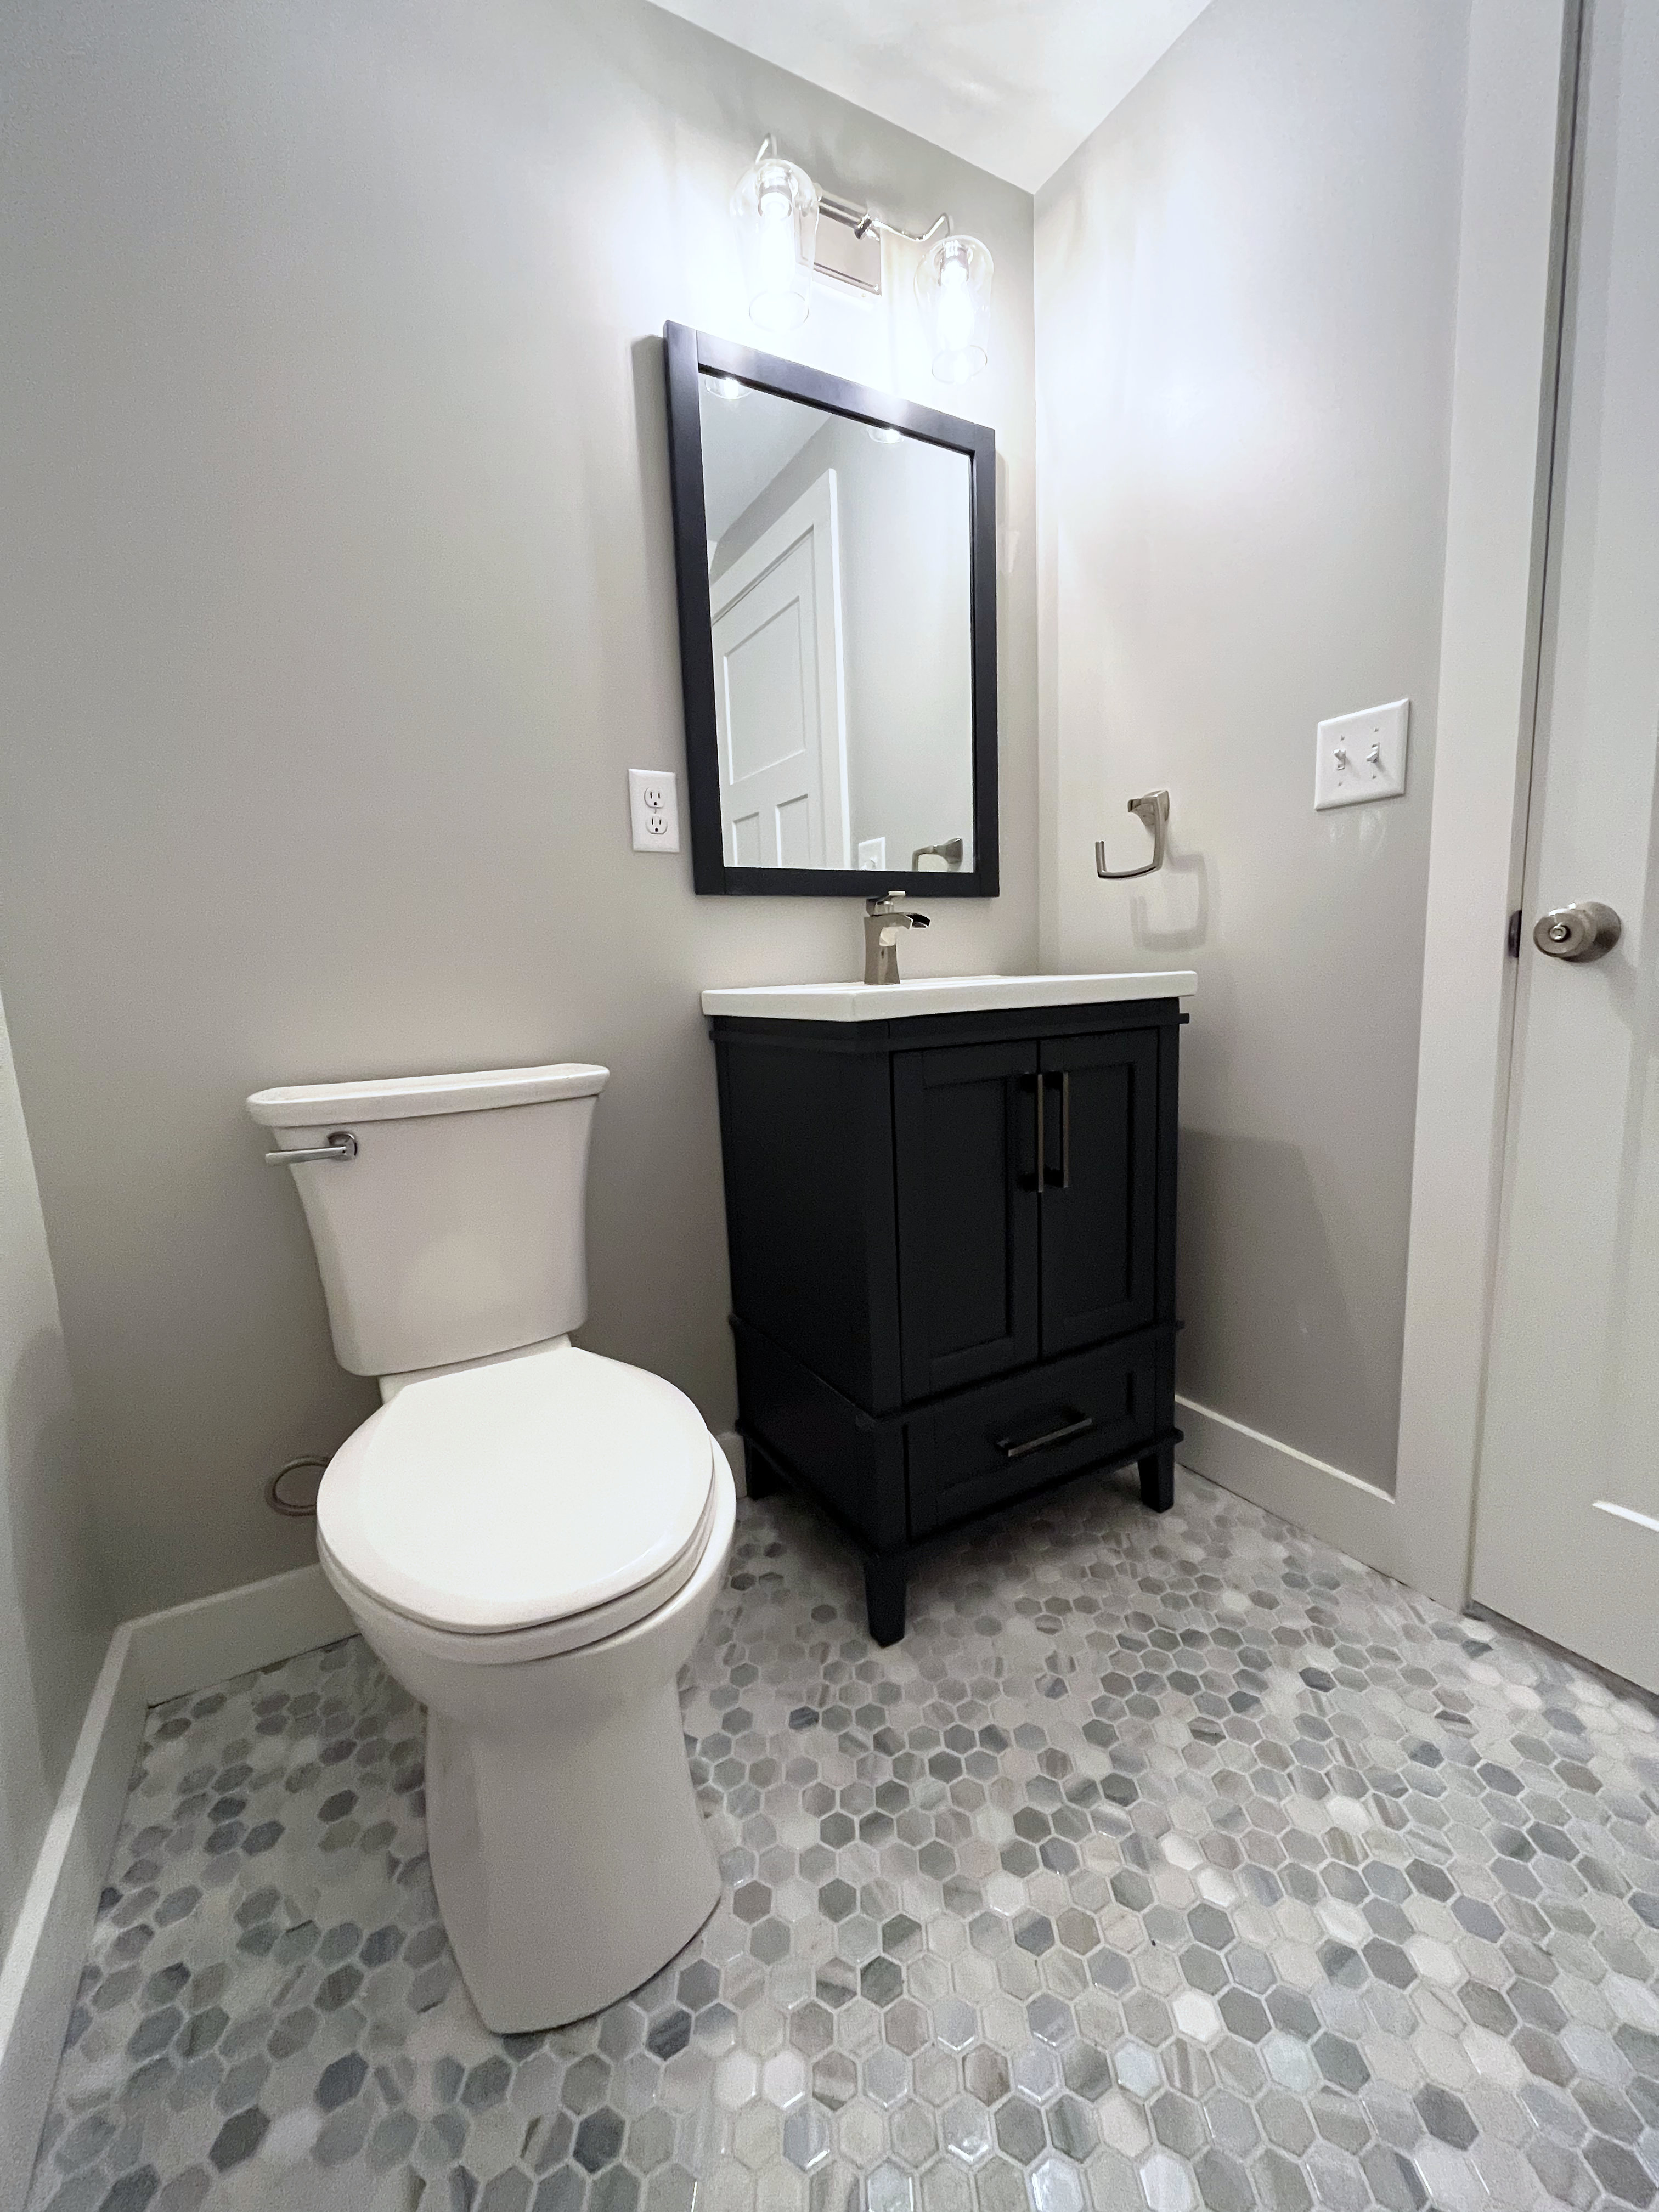 Brand new first floor half bathroom renovation with new tile, vanity and gray walls